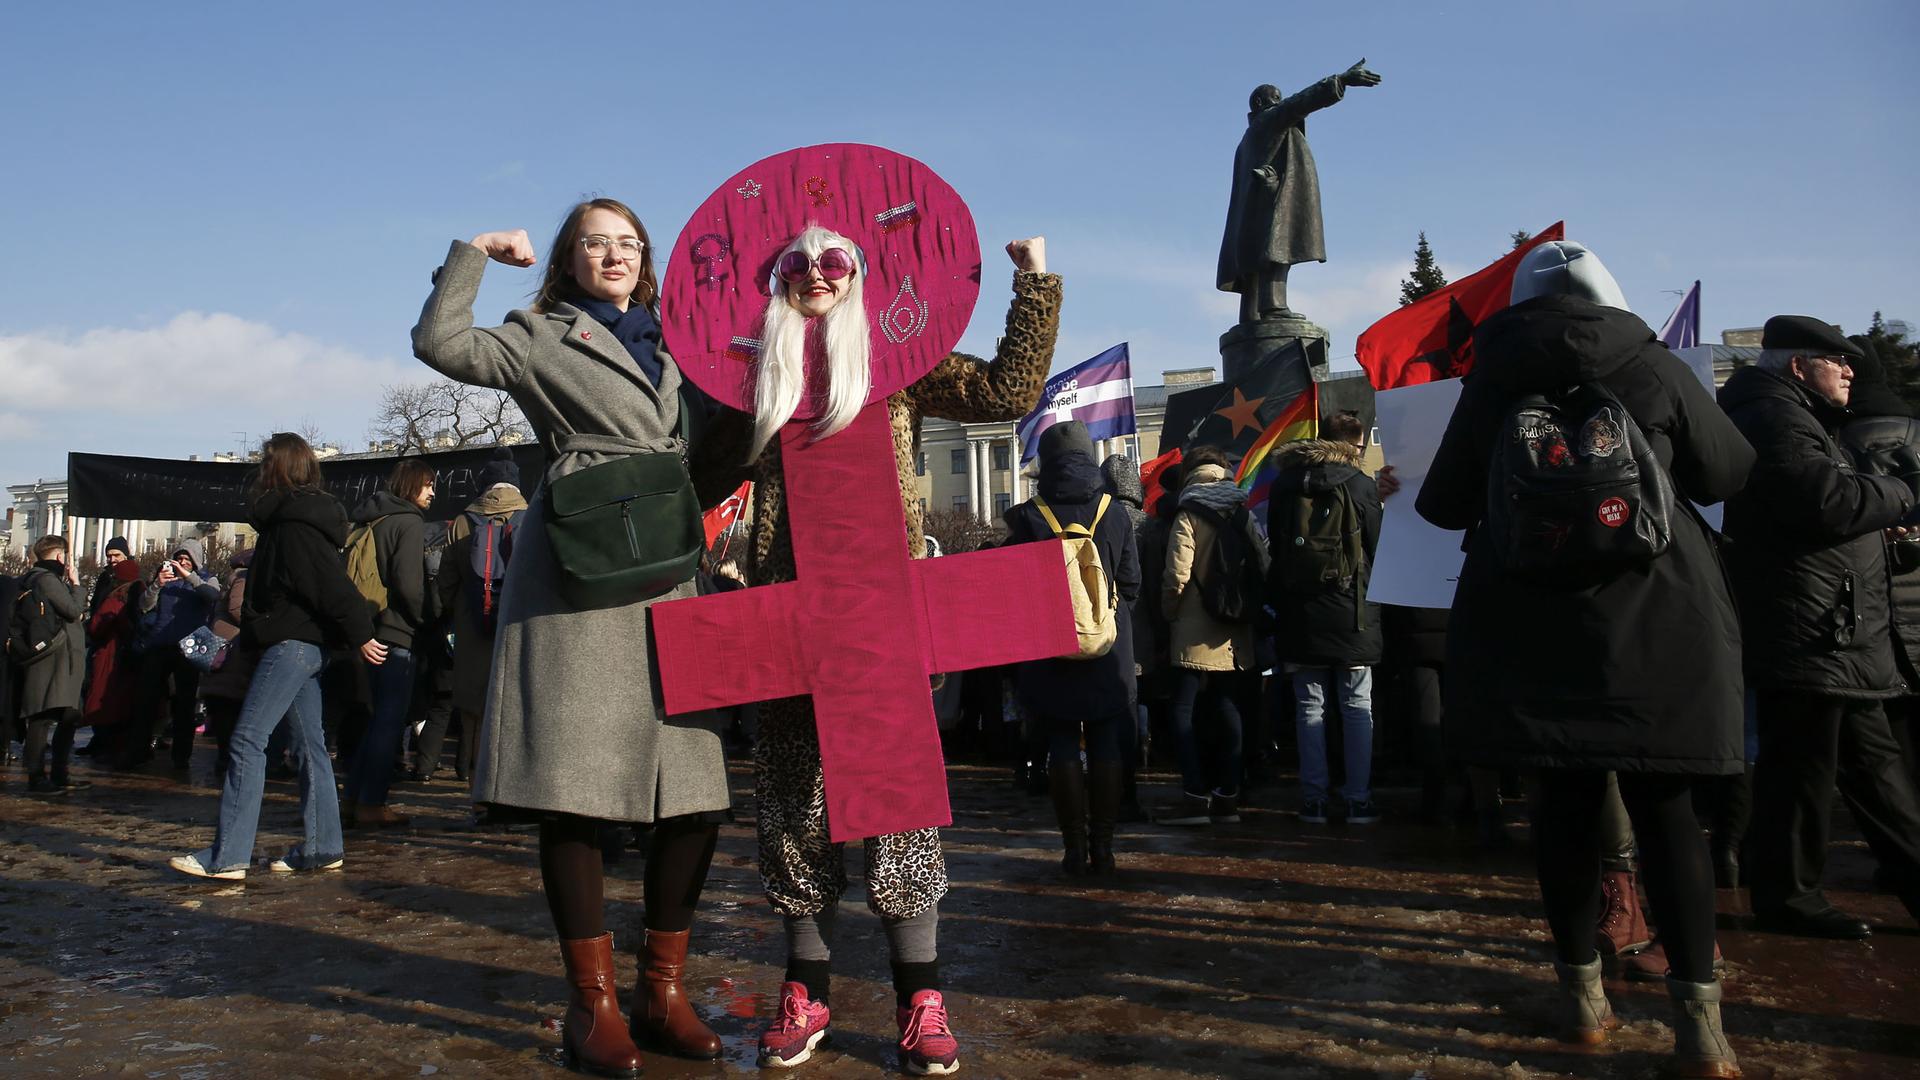 Two women hold their arms in a bicep flex pose. One is wearing a pink cardboard costume in the shape of the women's gender sign. 